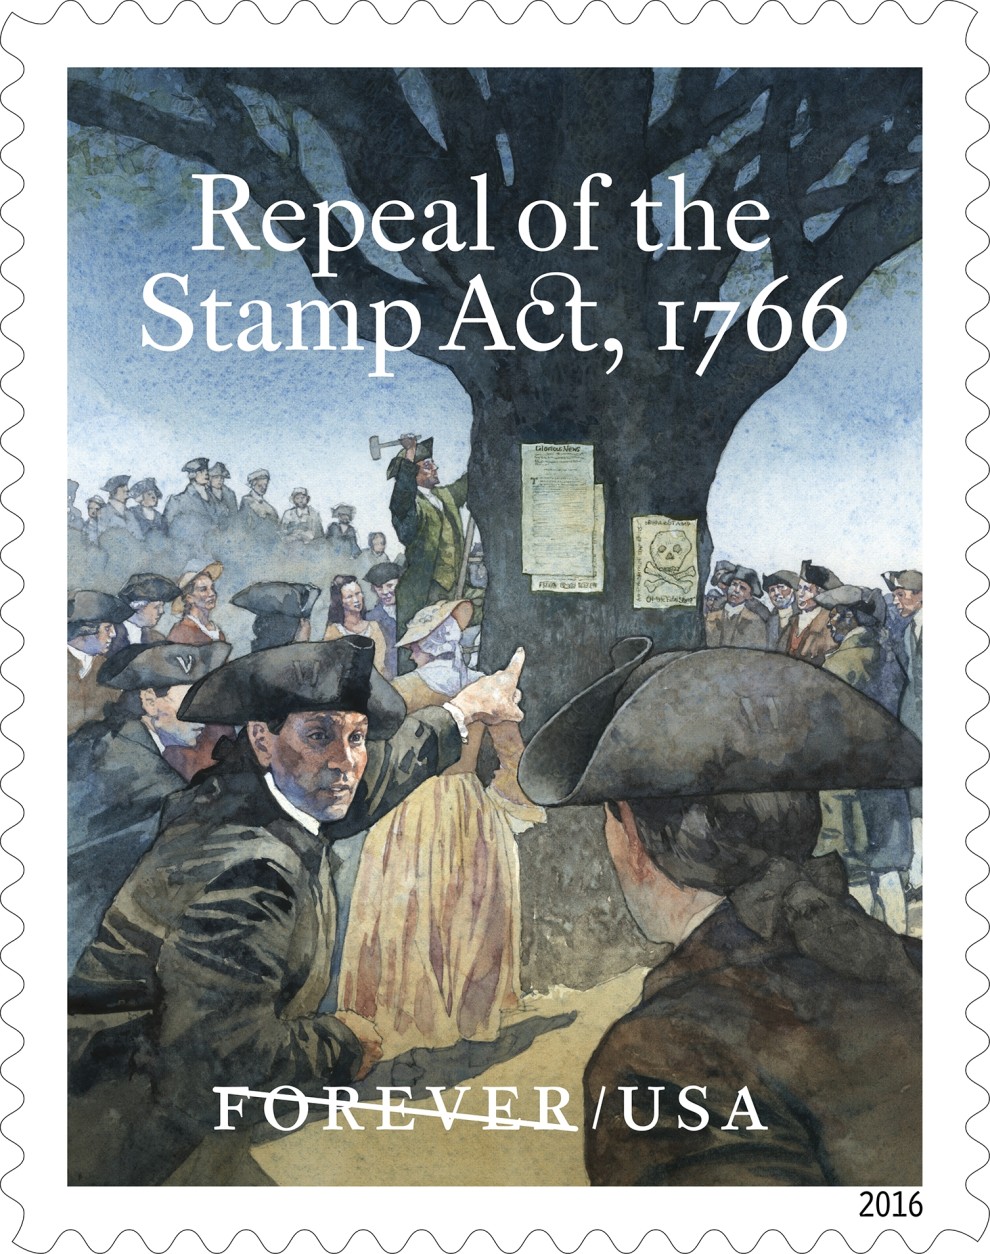 Repeal of the Stamp Act, 1766 (&copy; 2016 USPS)